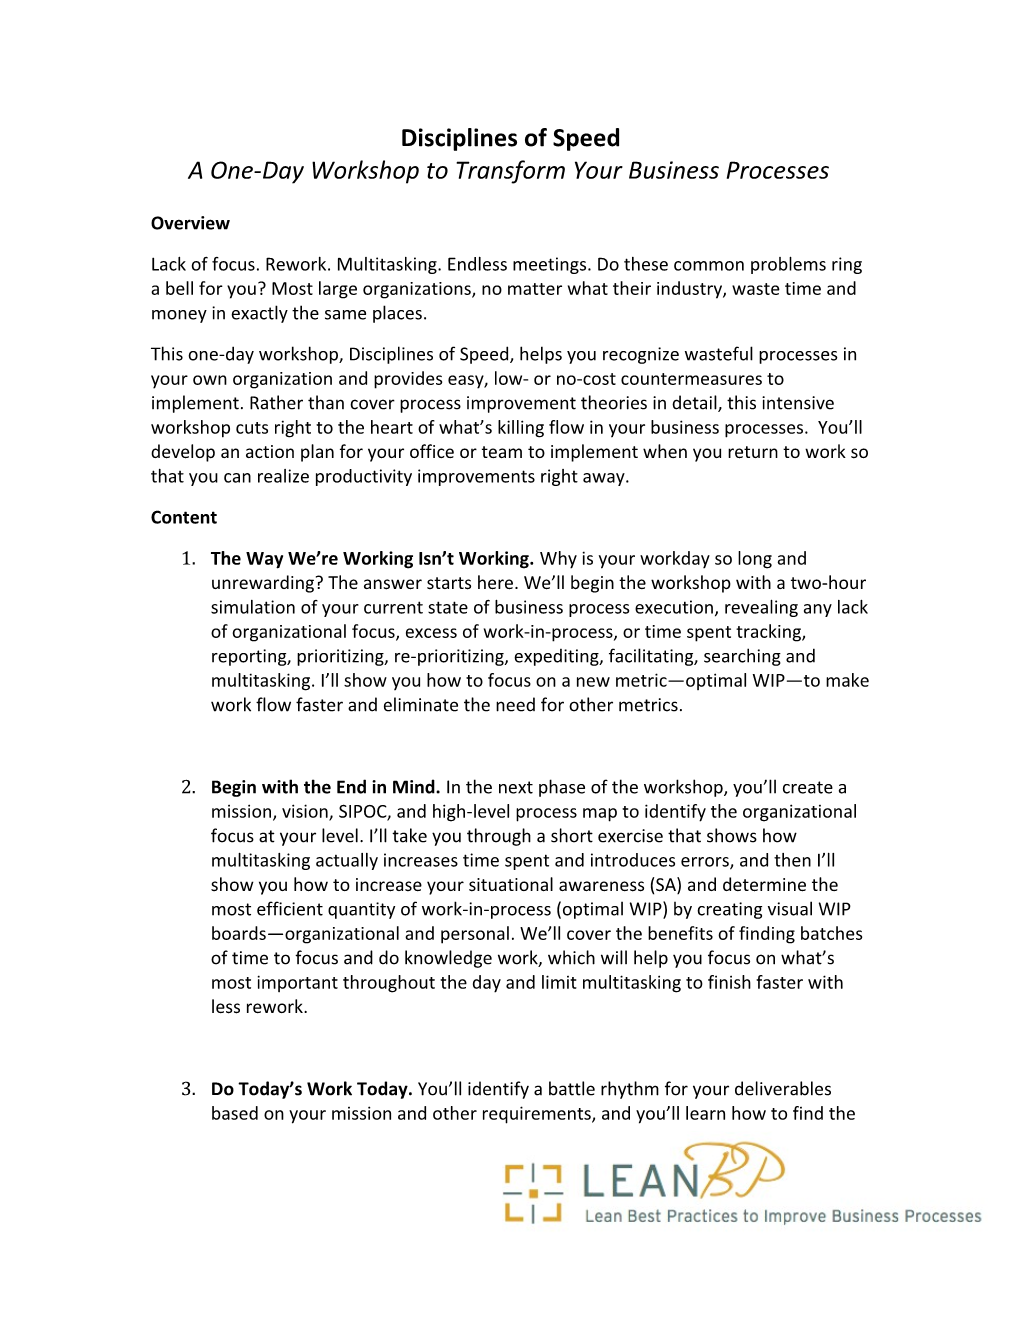 Aone-Day Workshop to Transform Your Business Processes